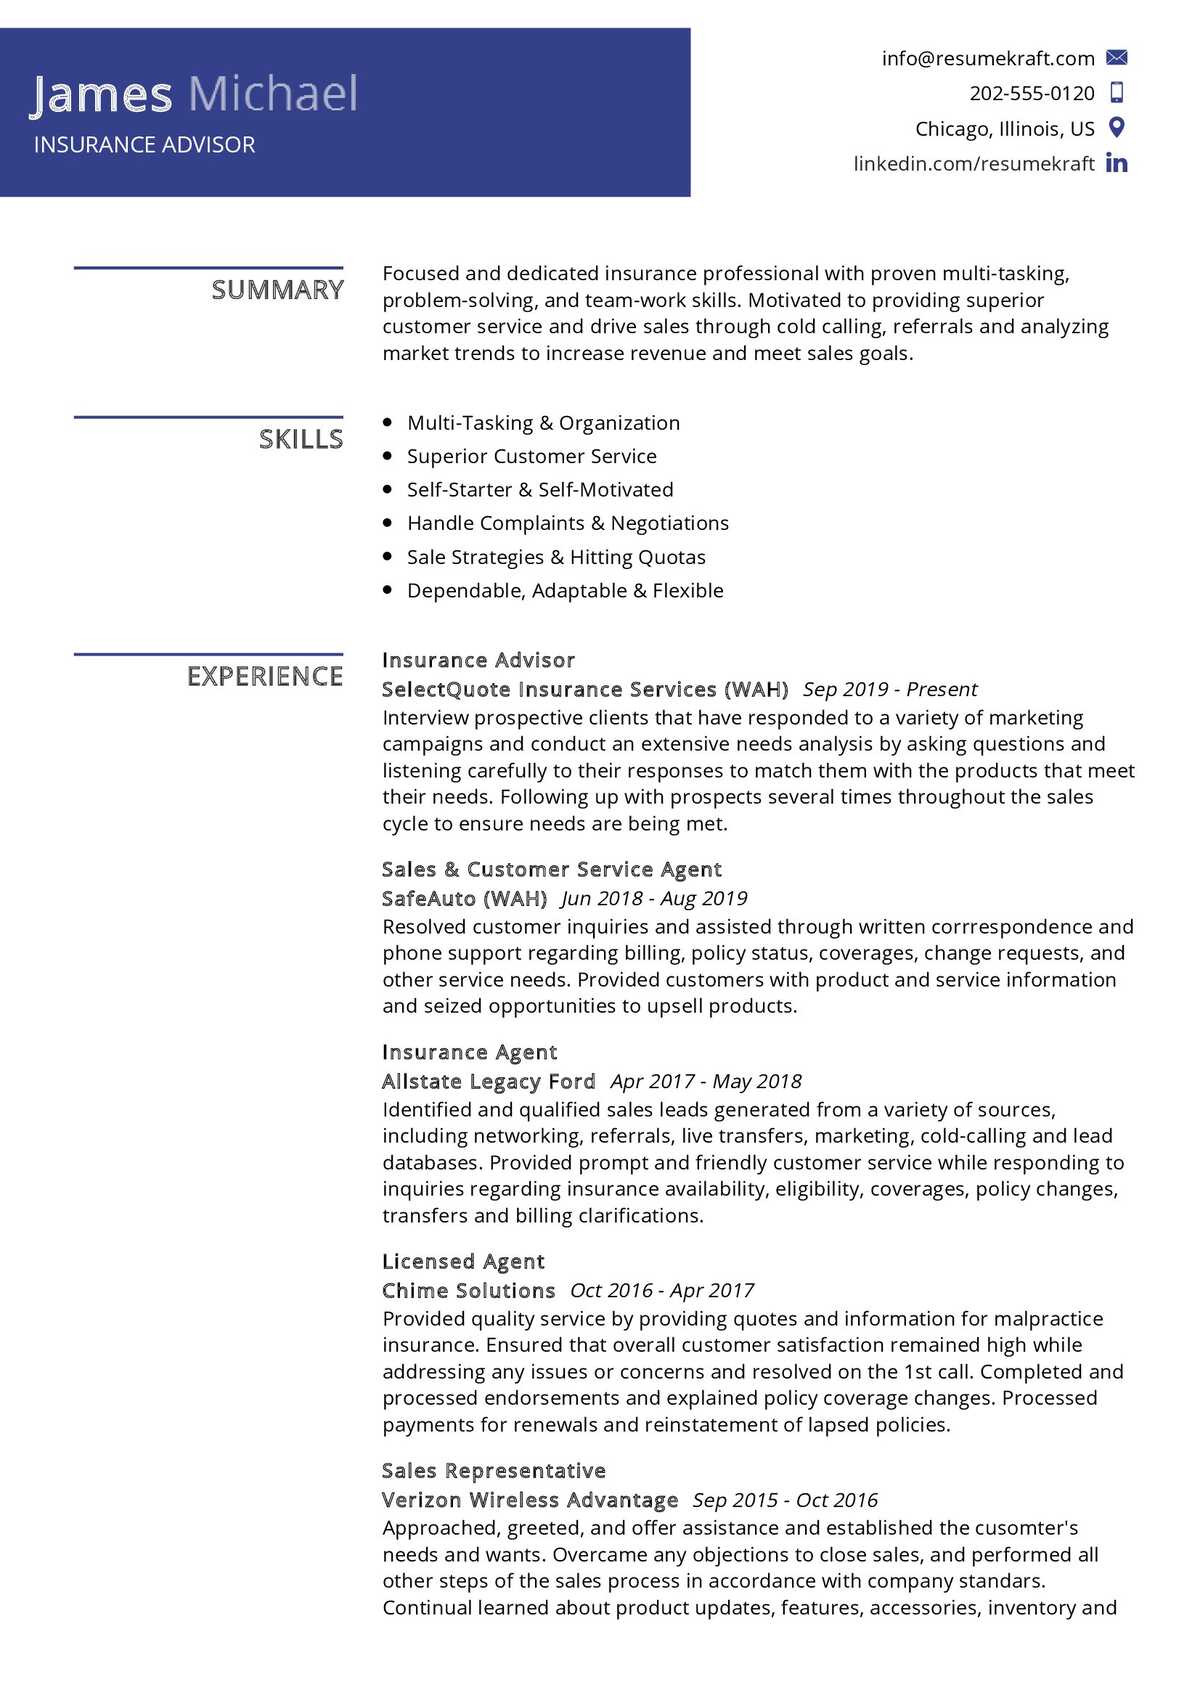 Sample Resume for Advocacy and Policy Work Insurance Advisor Resume Sample 2021 Write Guide & Tips …